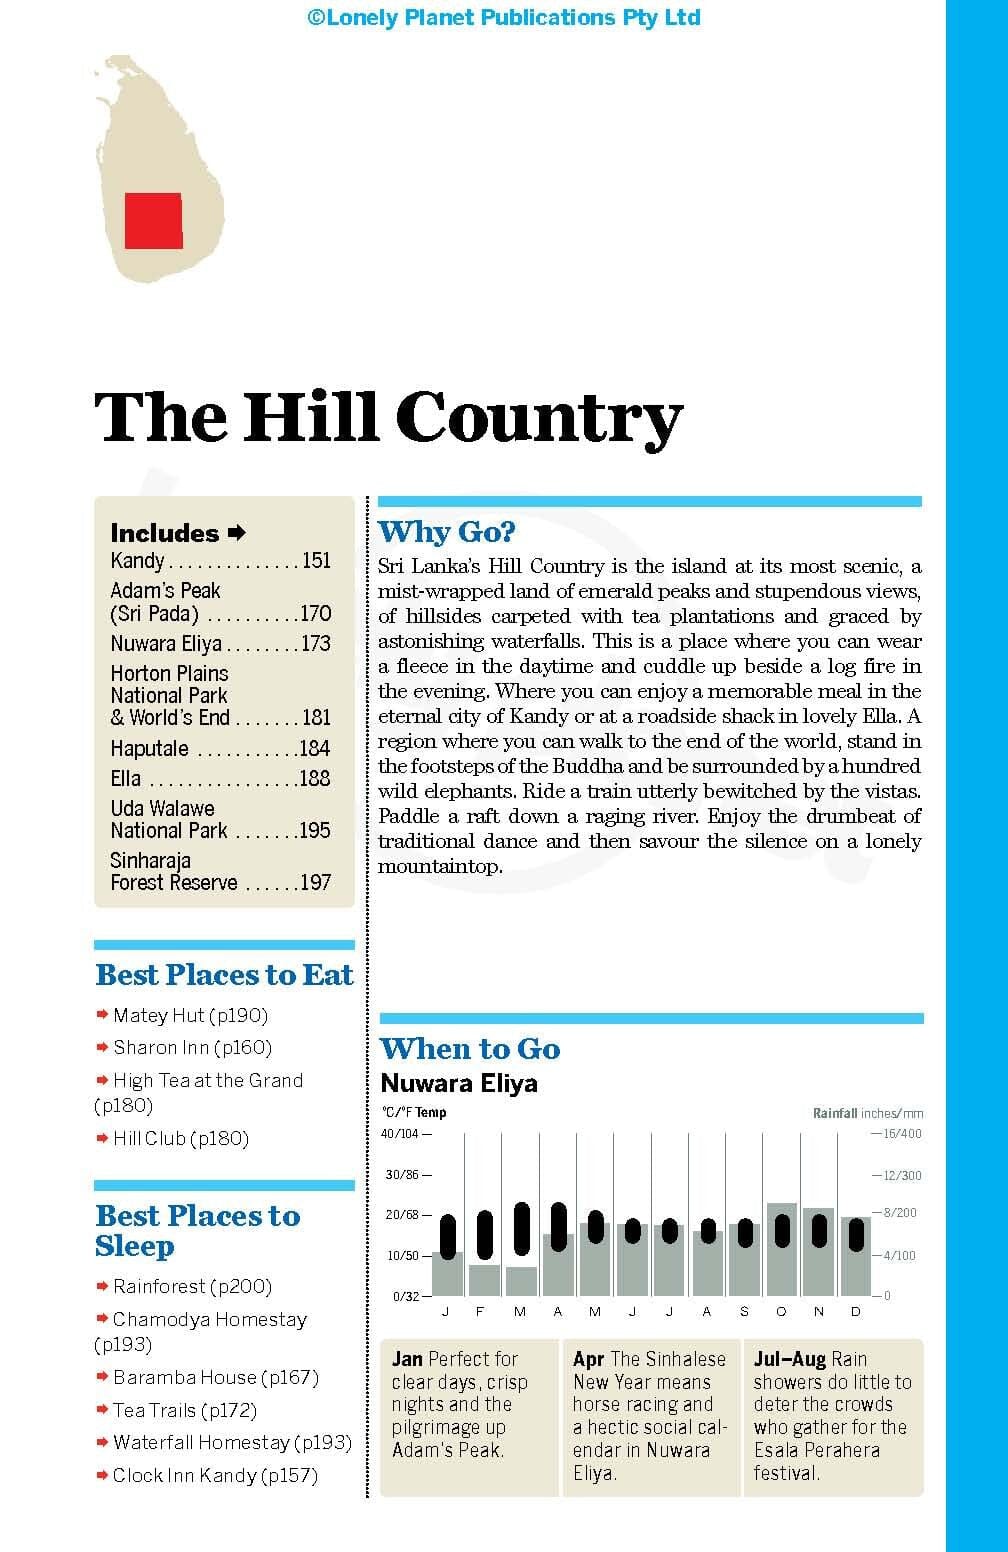 The Hill Country travel - Lonely Planet